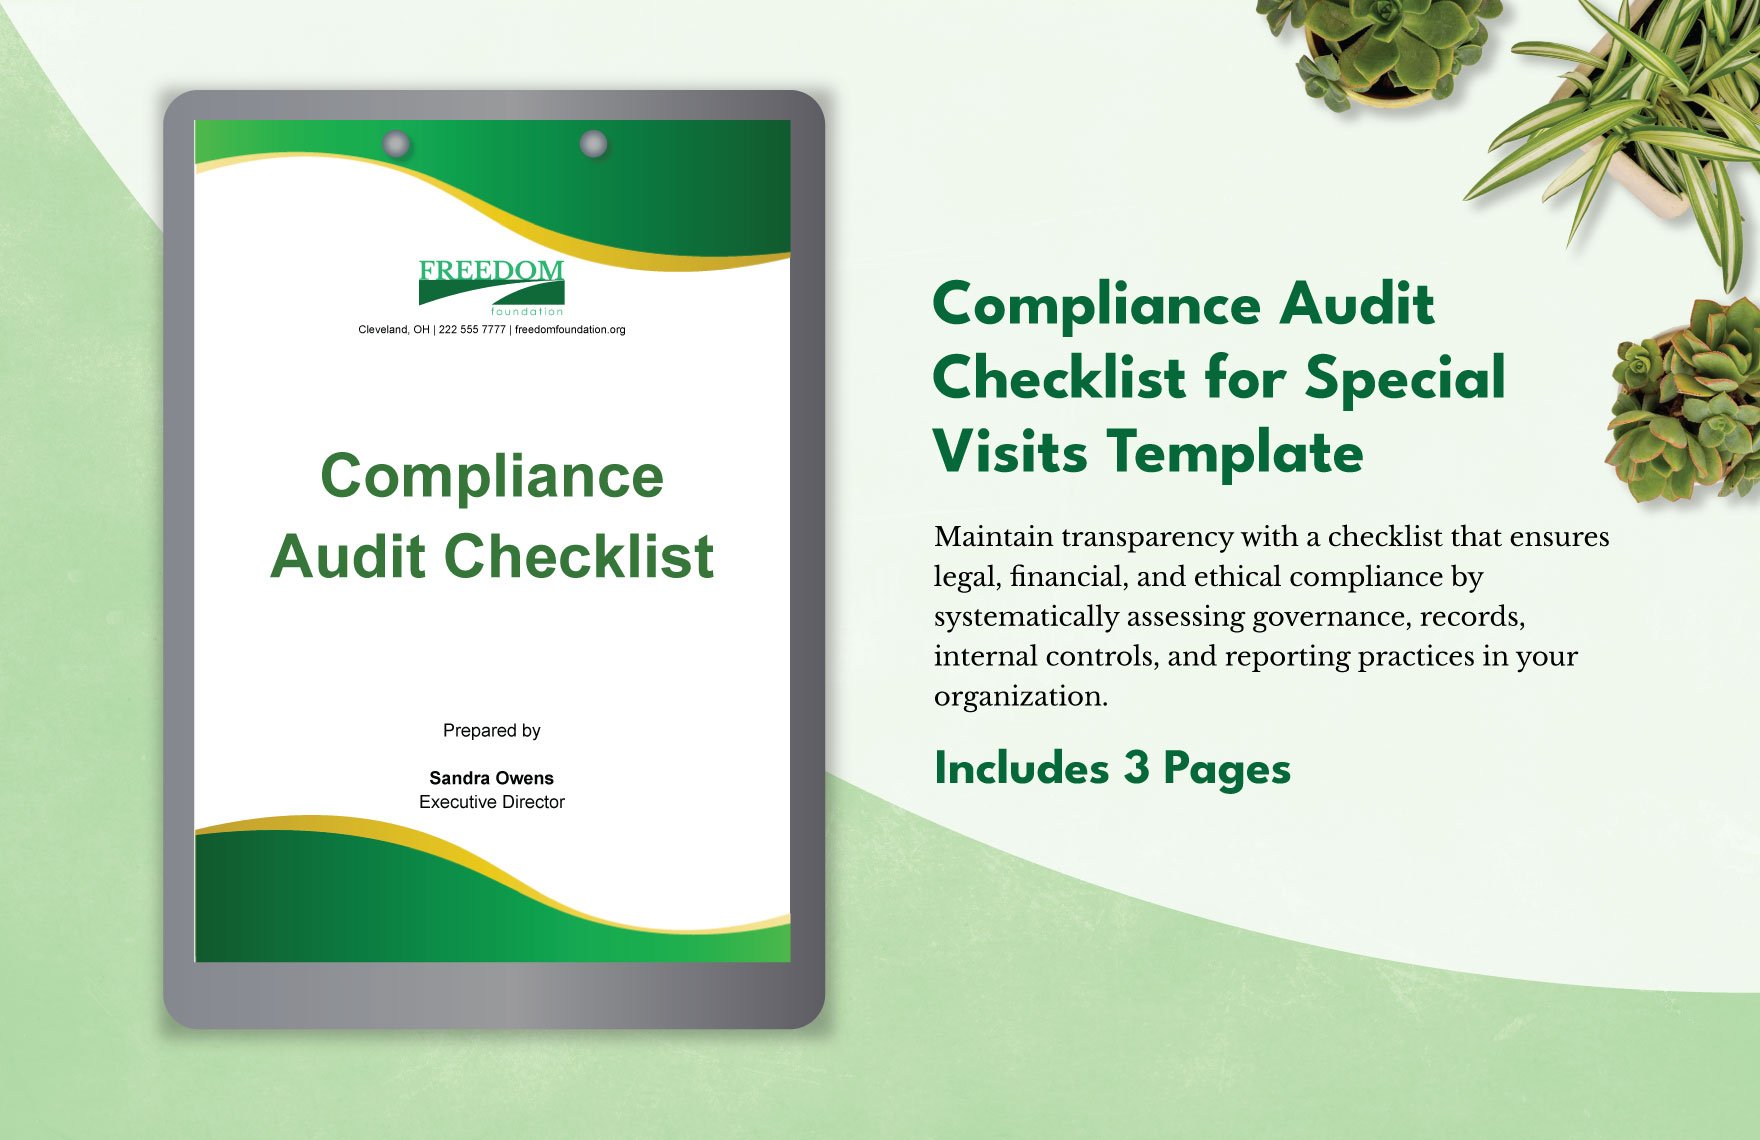 Compliance Audit Checklist for Special Visits Template